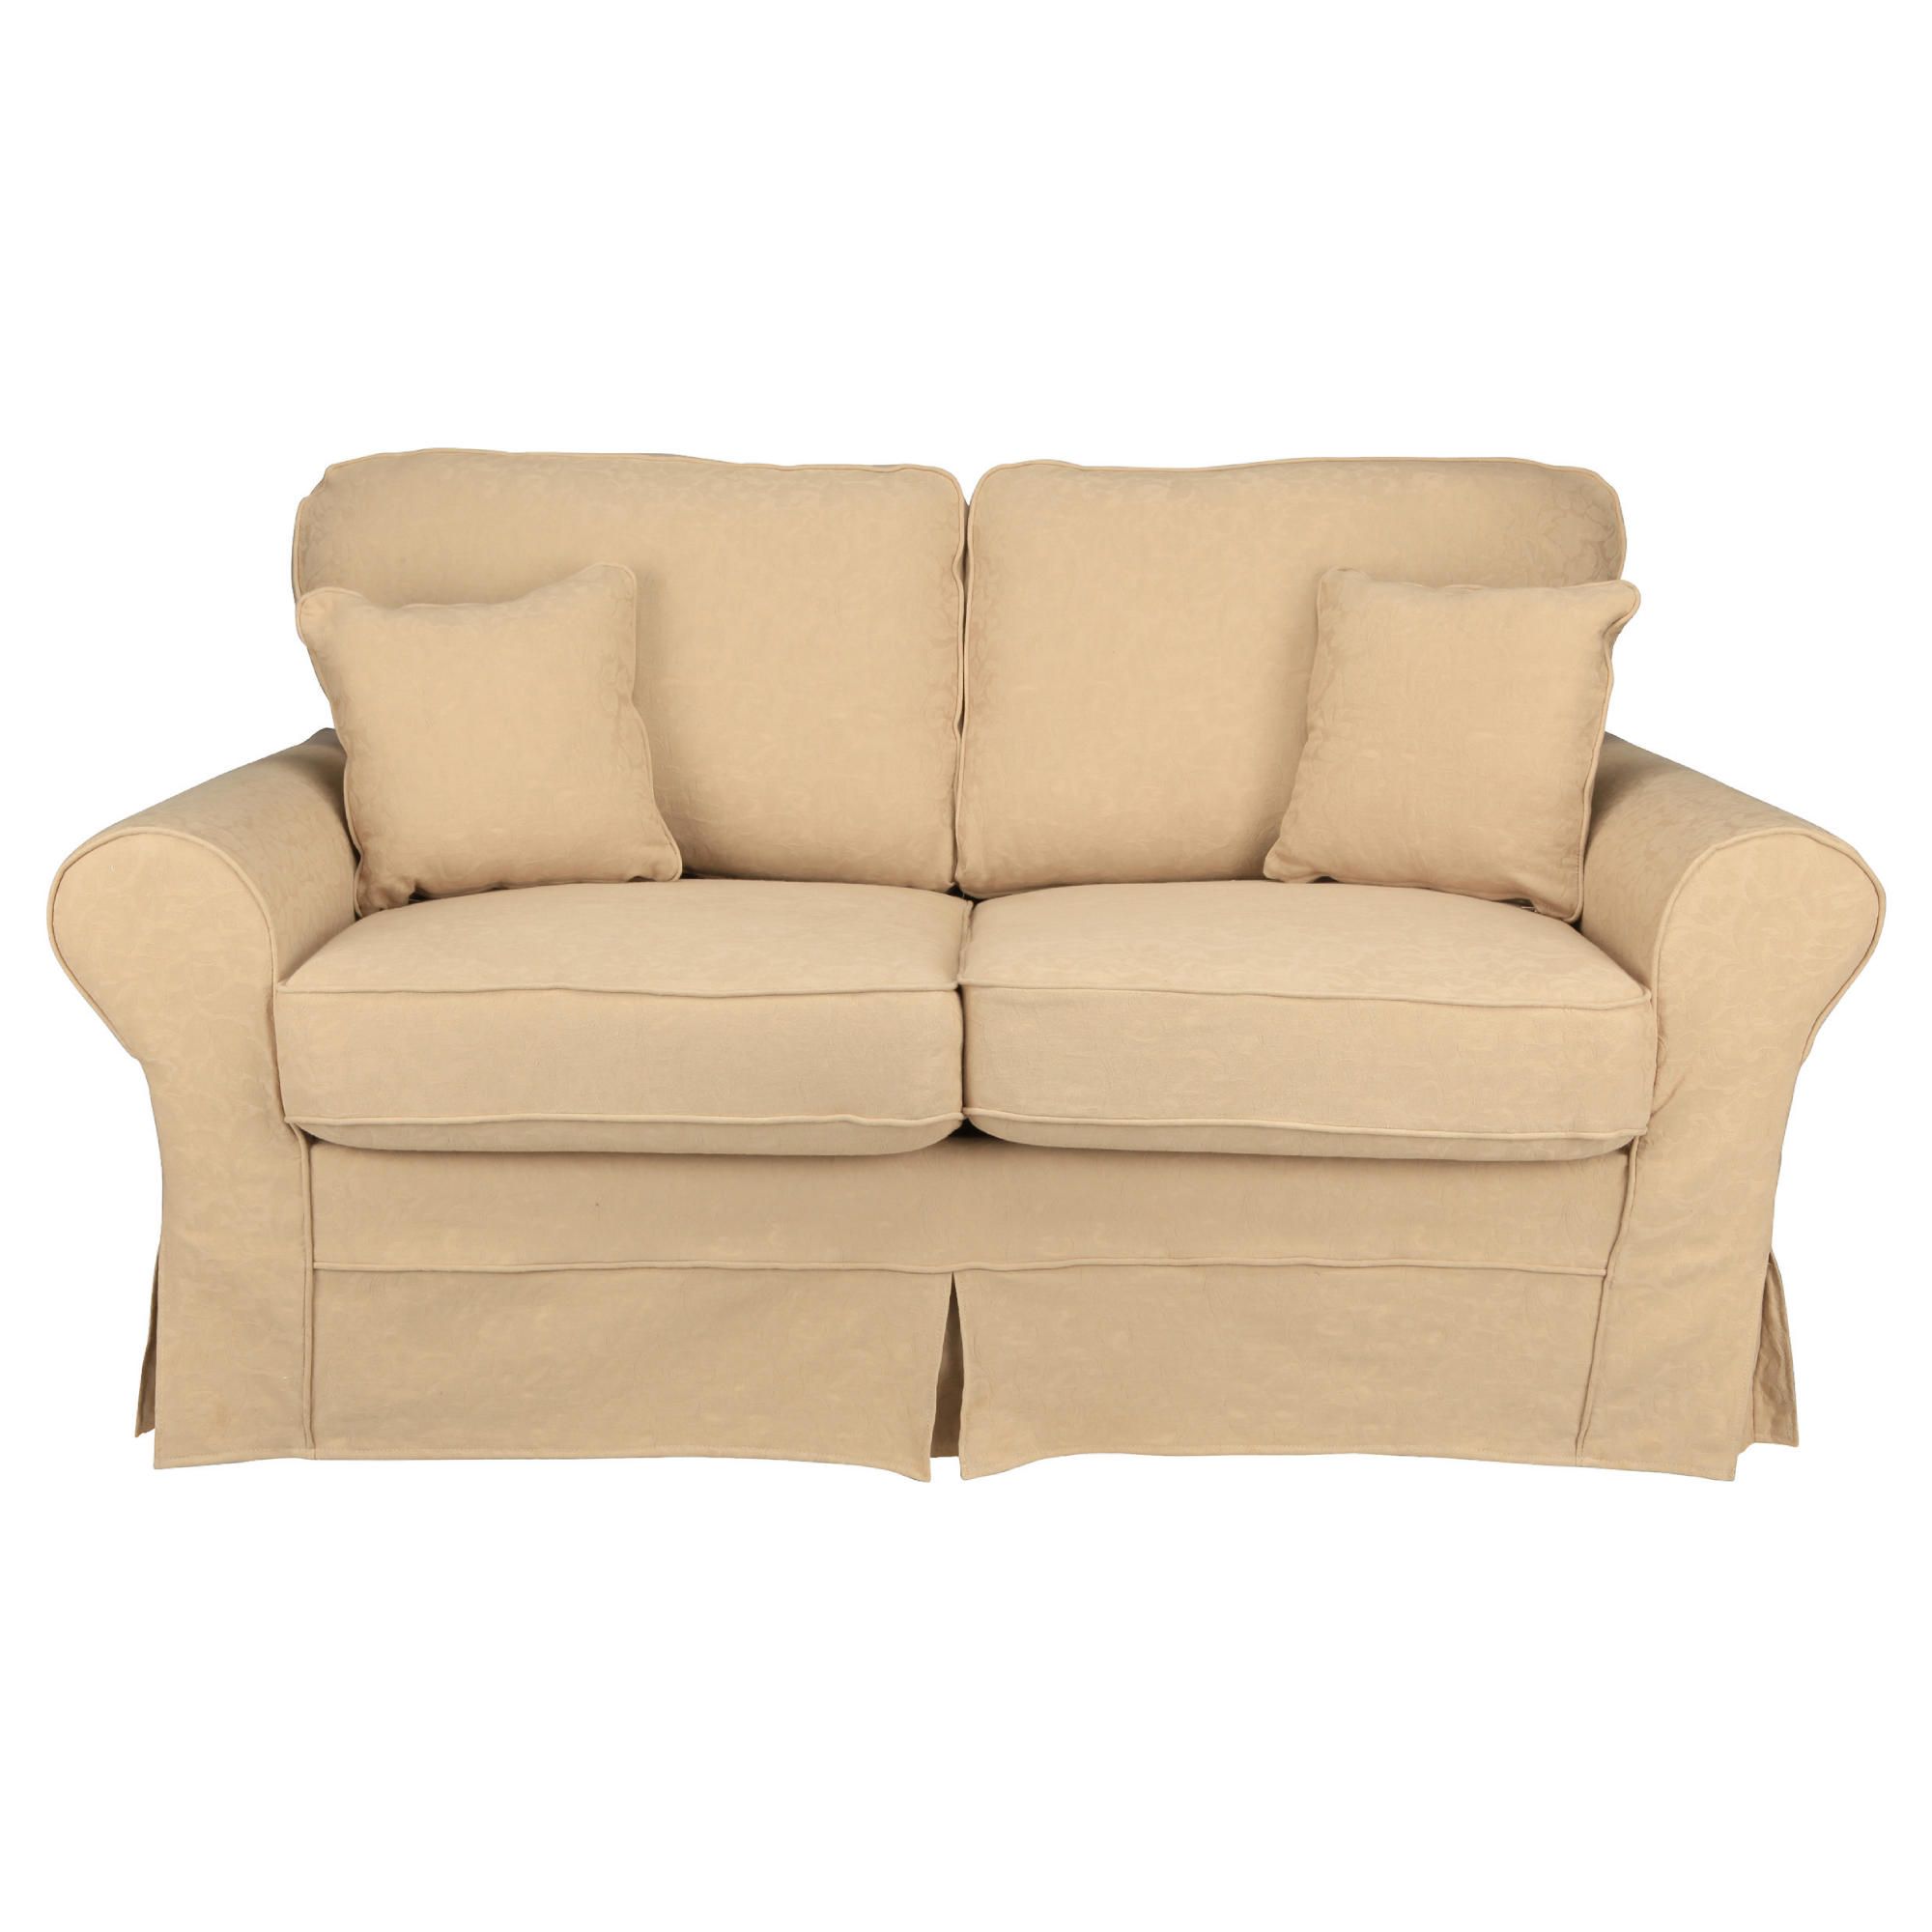 Louisa Sofa Bed with Removable Jaquard Cover, Camel at Tesco Direct